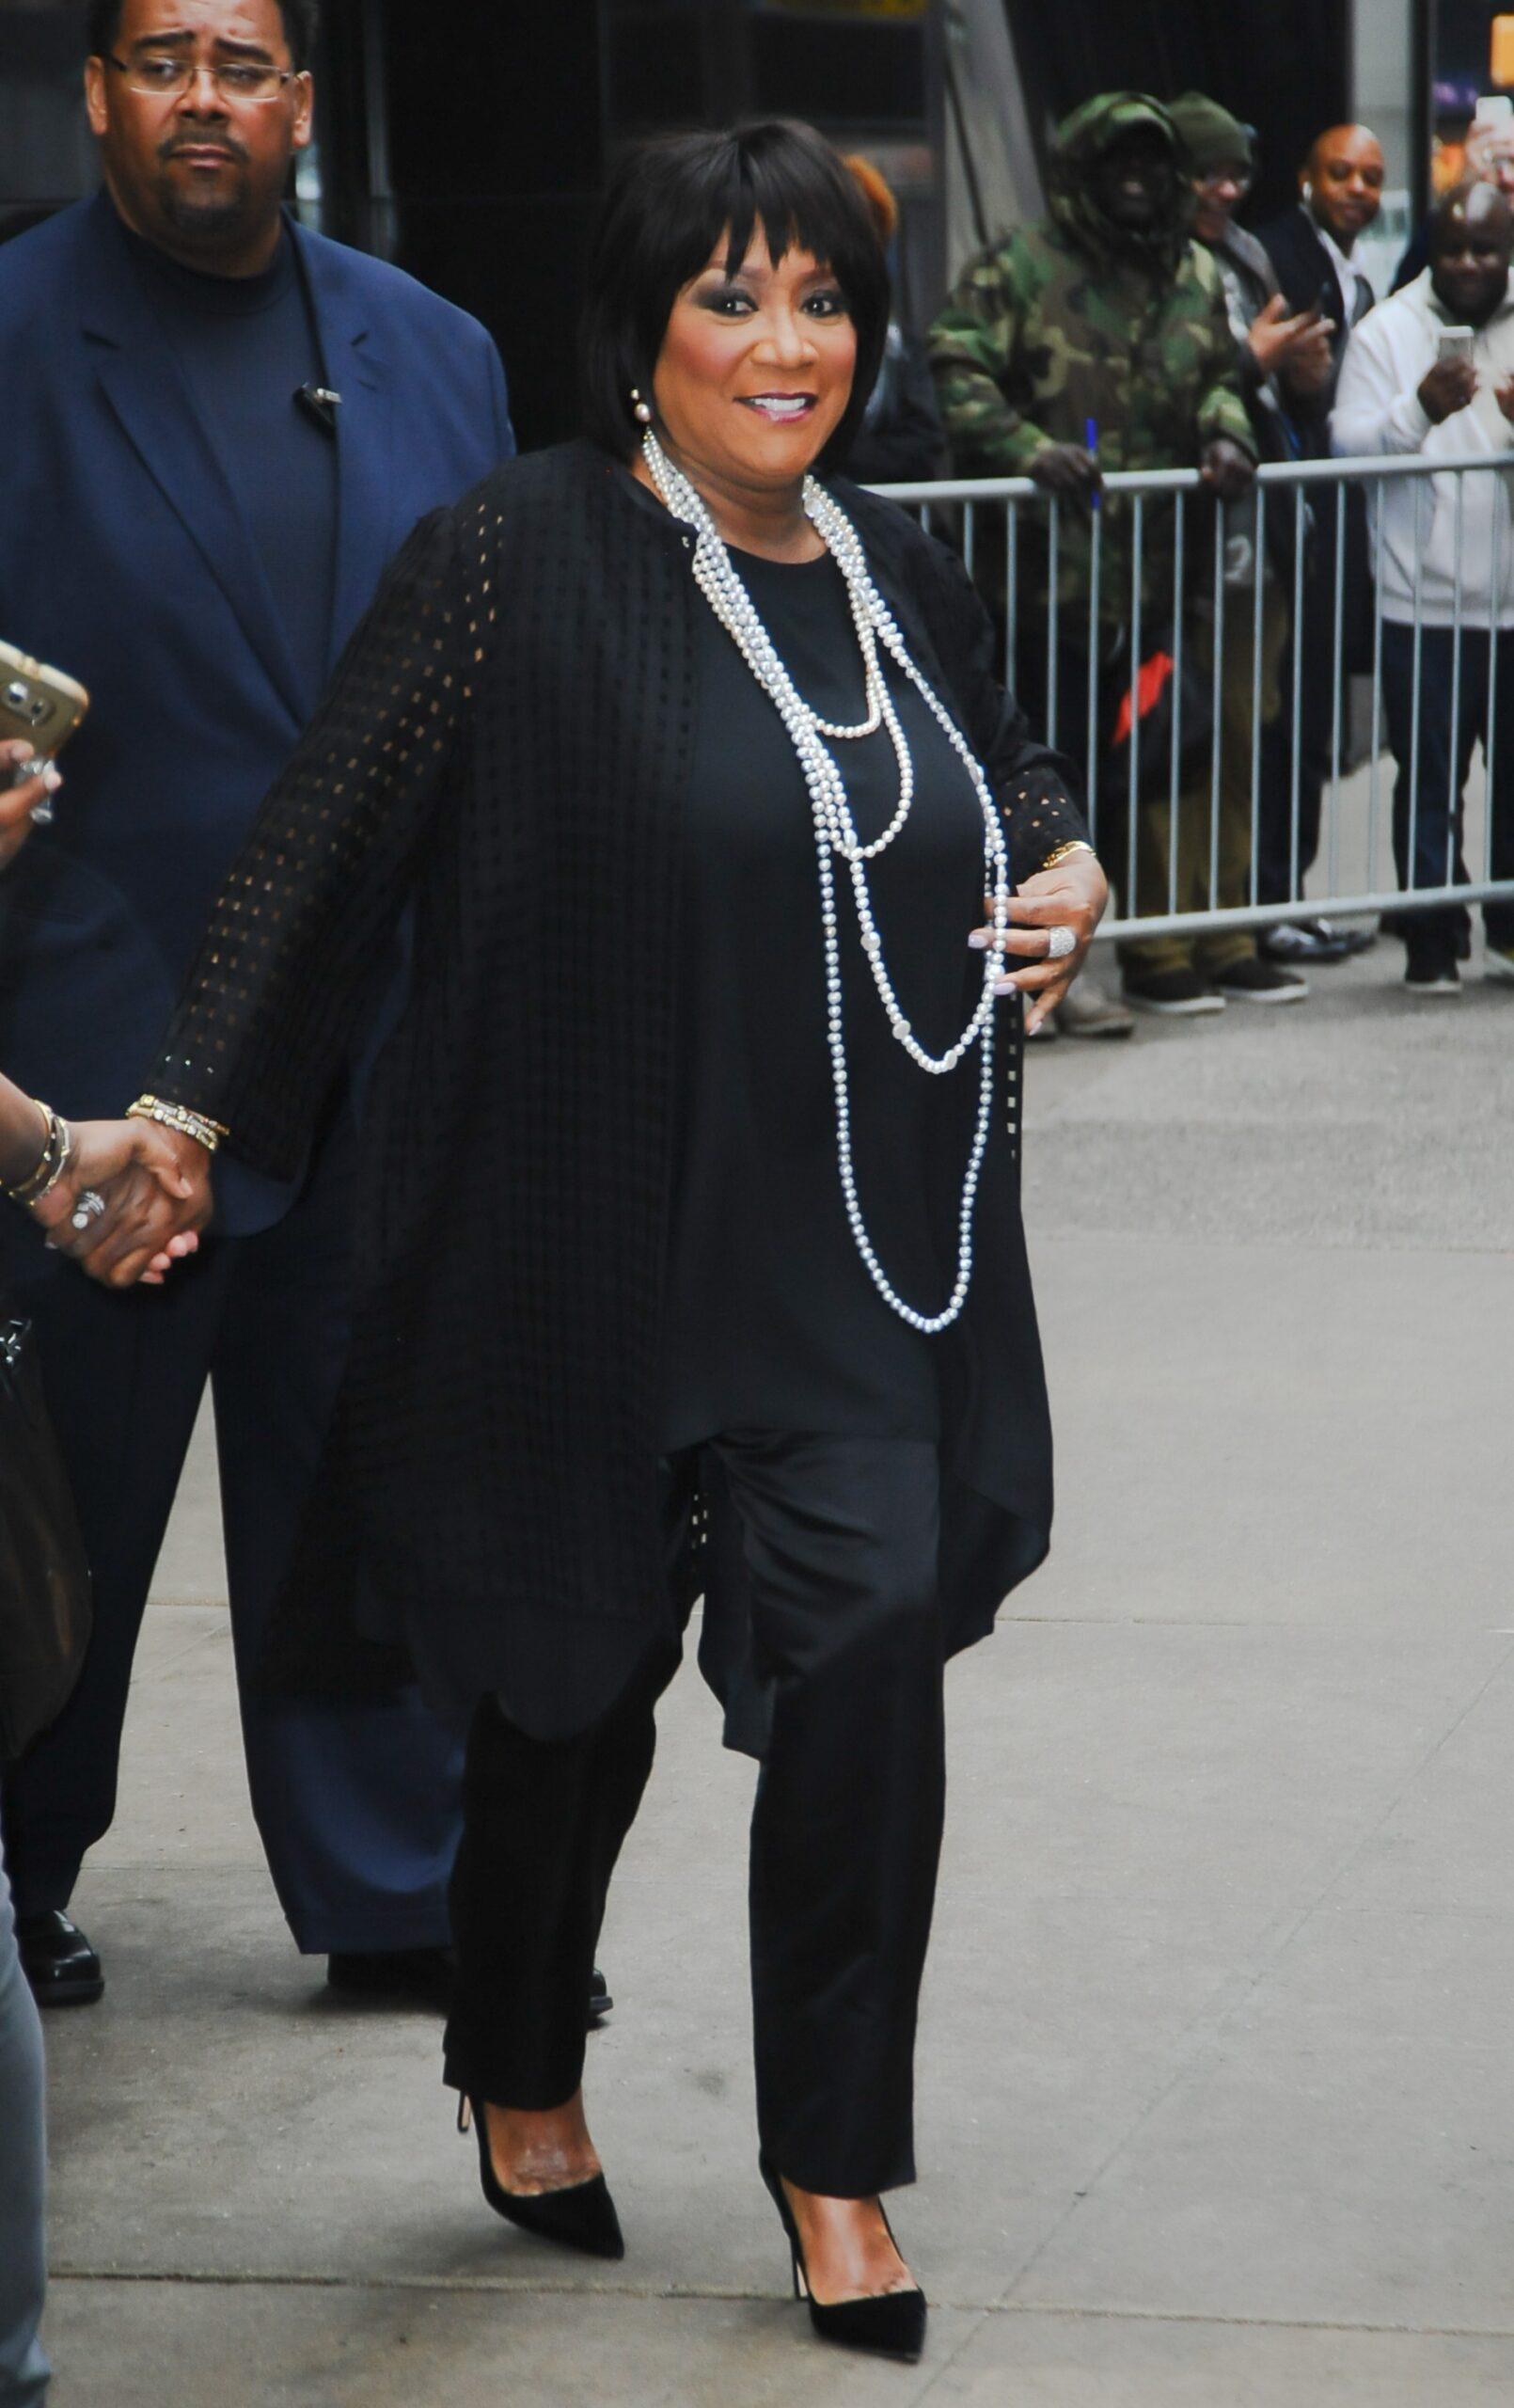 Singer Patti LaBelle enters the apos Good Morning America apos taping at the ABC Times Square Studios